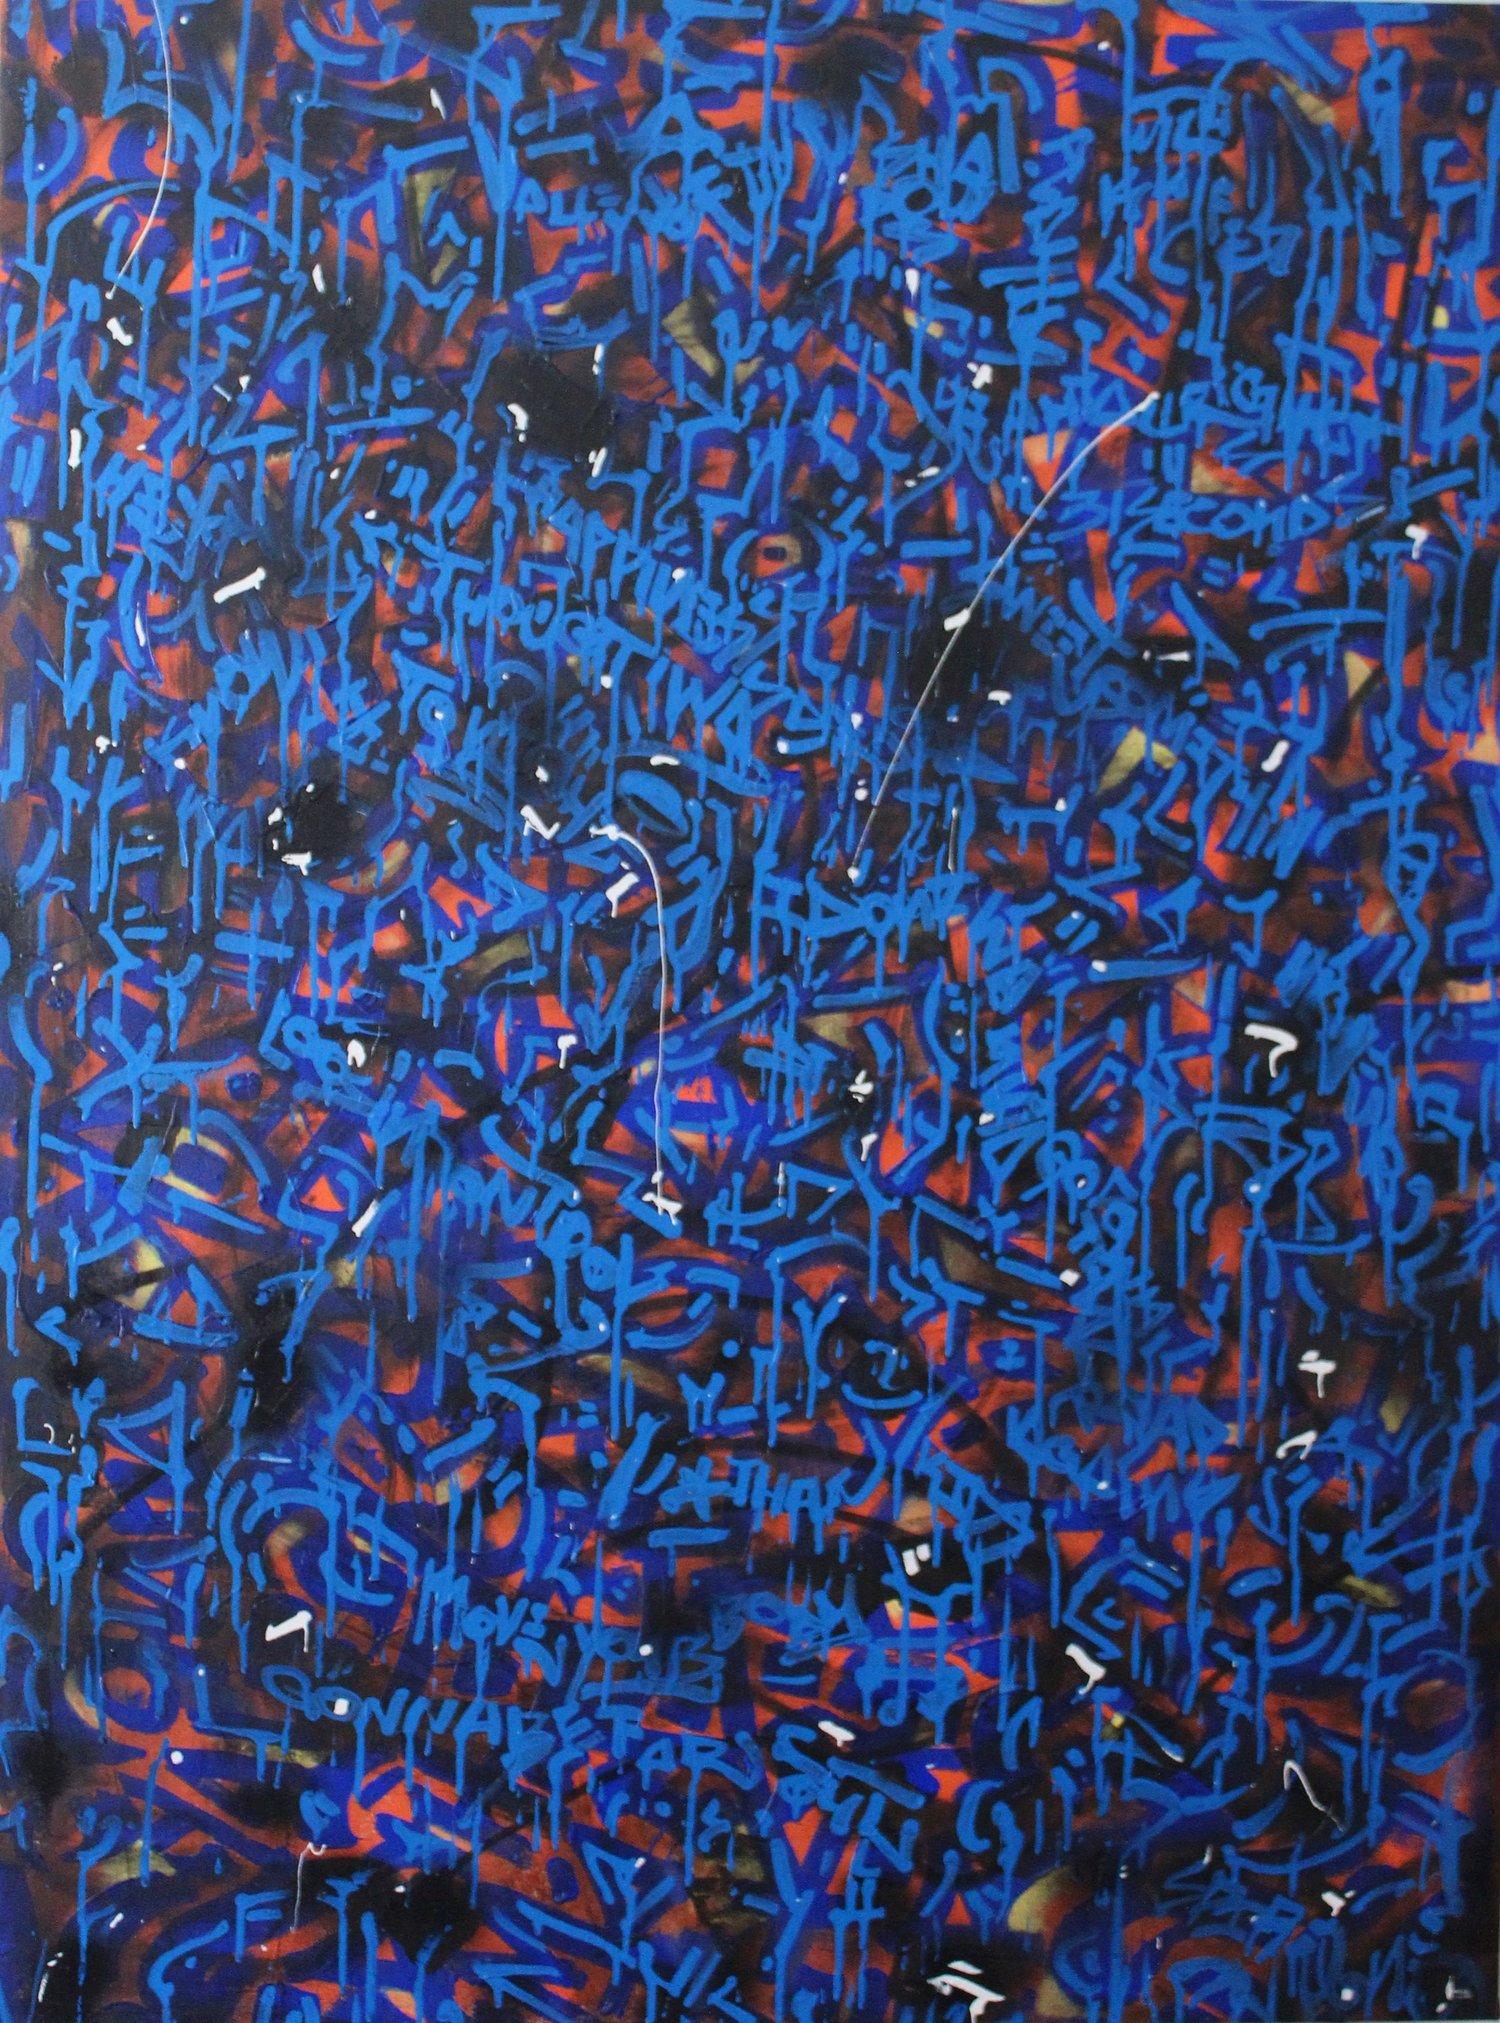 Matthew Spire Abstract Painting - "Water Over Fire", Graffiti and Street Art Painting with Blue Text